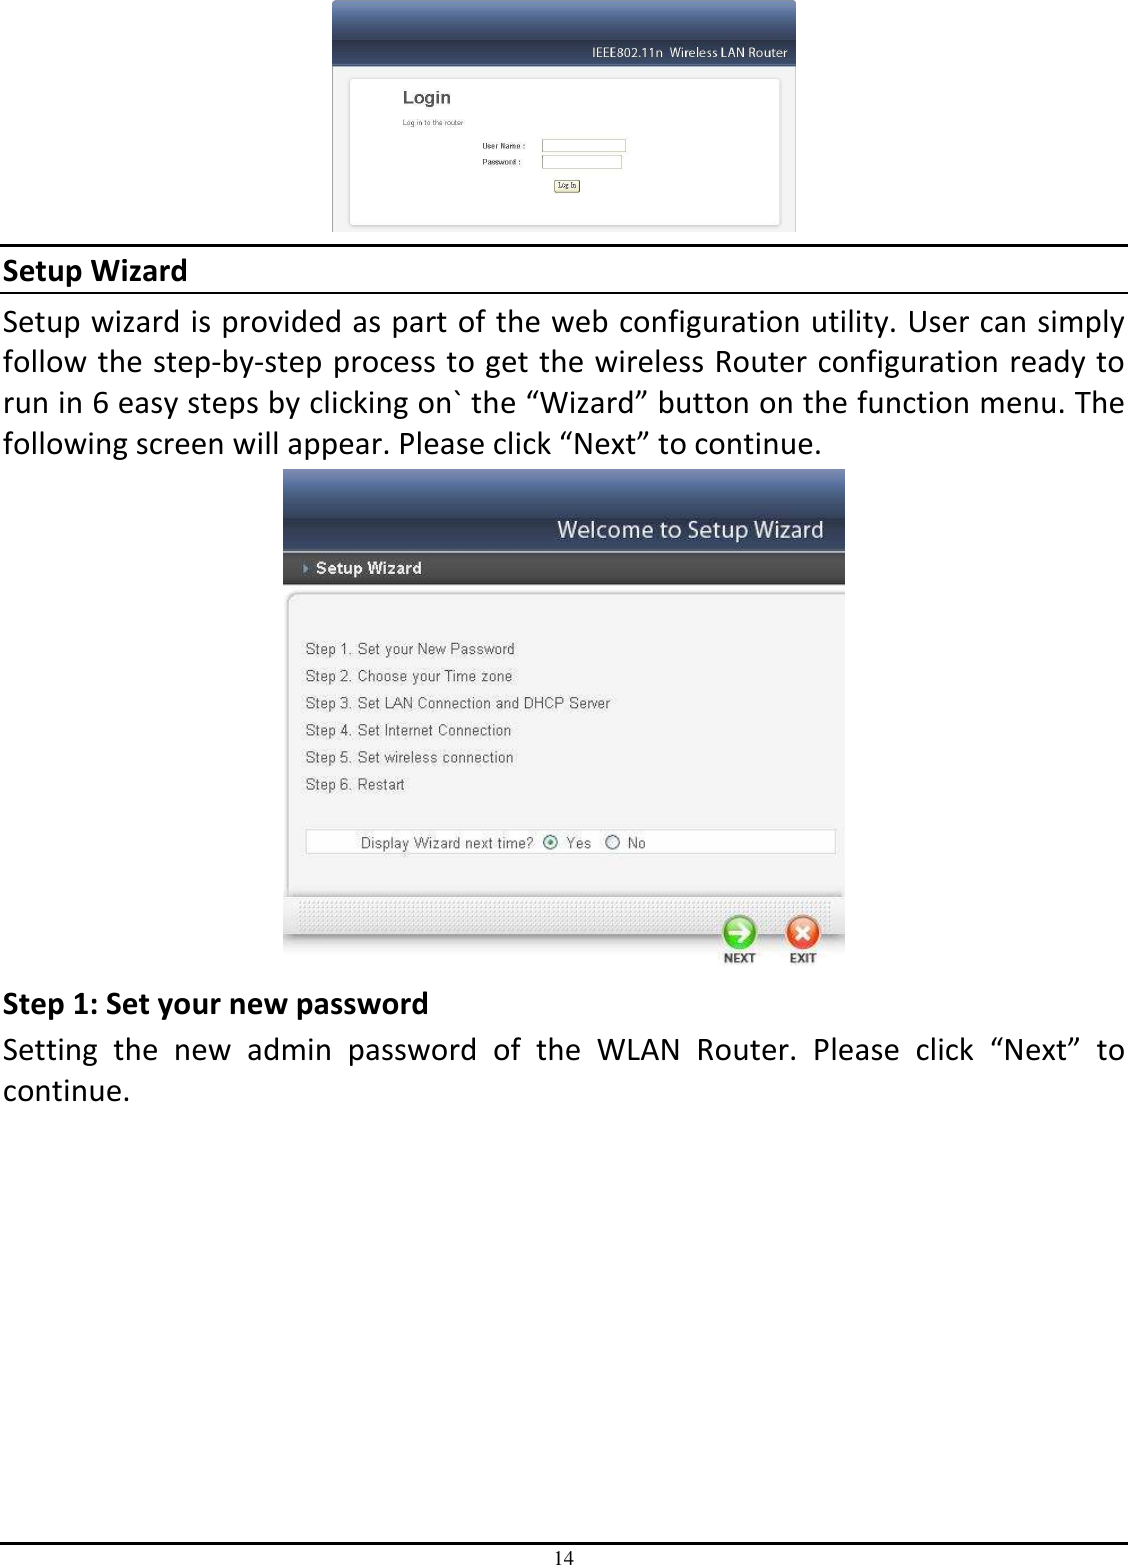 14  Setup Wizard Setup wizard is provided as part of the web configuration utility. User can simply follow the step-by-step process to get the wireless Router configuration ready to run in 6 easy steps by clicking on` the “Wizard” button on the function menu. The following screen will appear. Please click “Next” to continue.  Step 1: Set your new password Setting  the  new  admin  password  of  the  WLAN  Router.  Please  click  “Next”  to continue.  